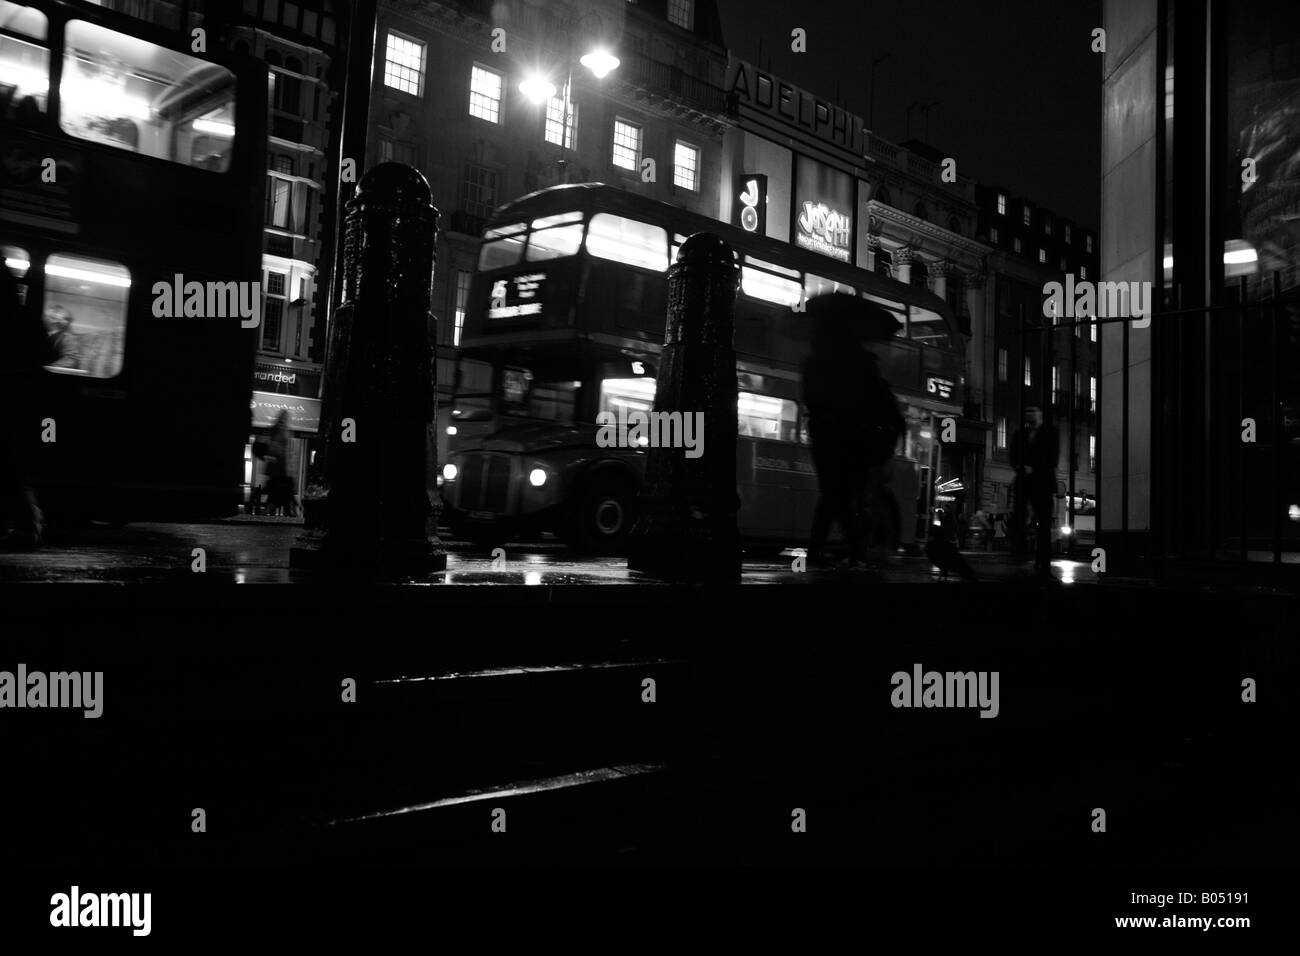 Number 15 bus on The Strand, London Stock Photo